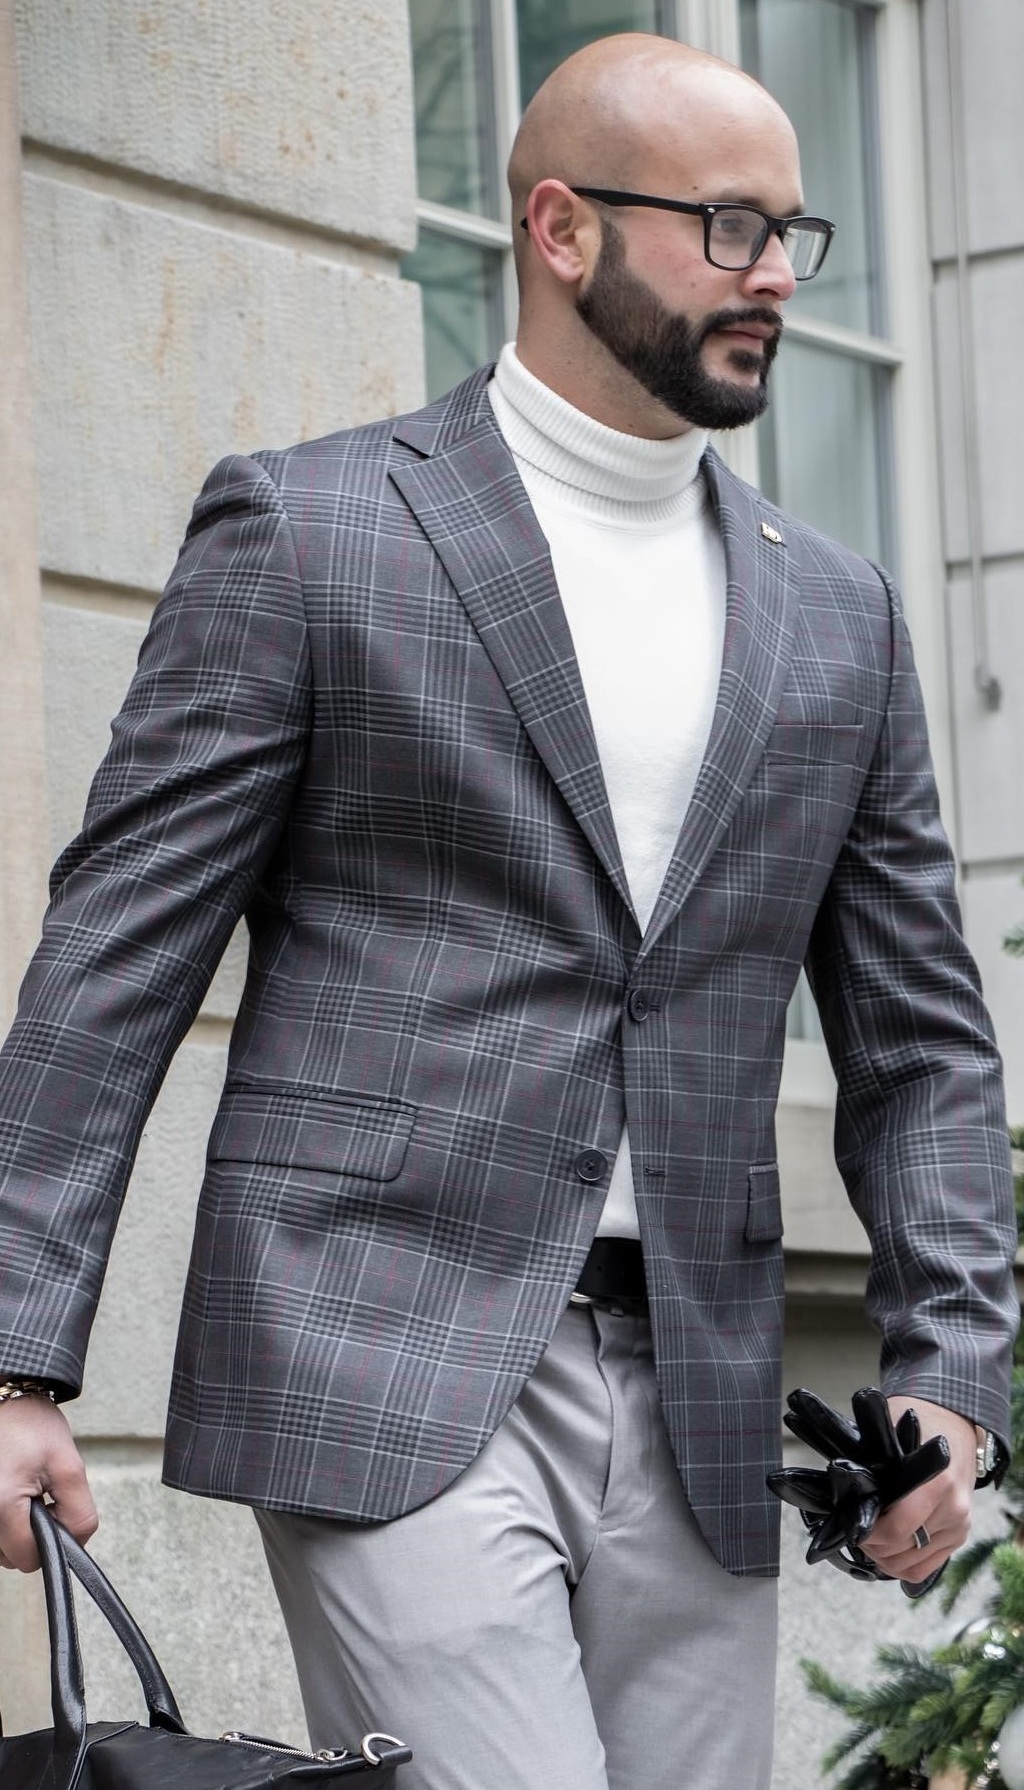 Modest Suit Looks for Men with Suit over a turtle neck tee.